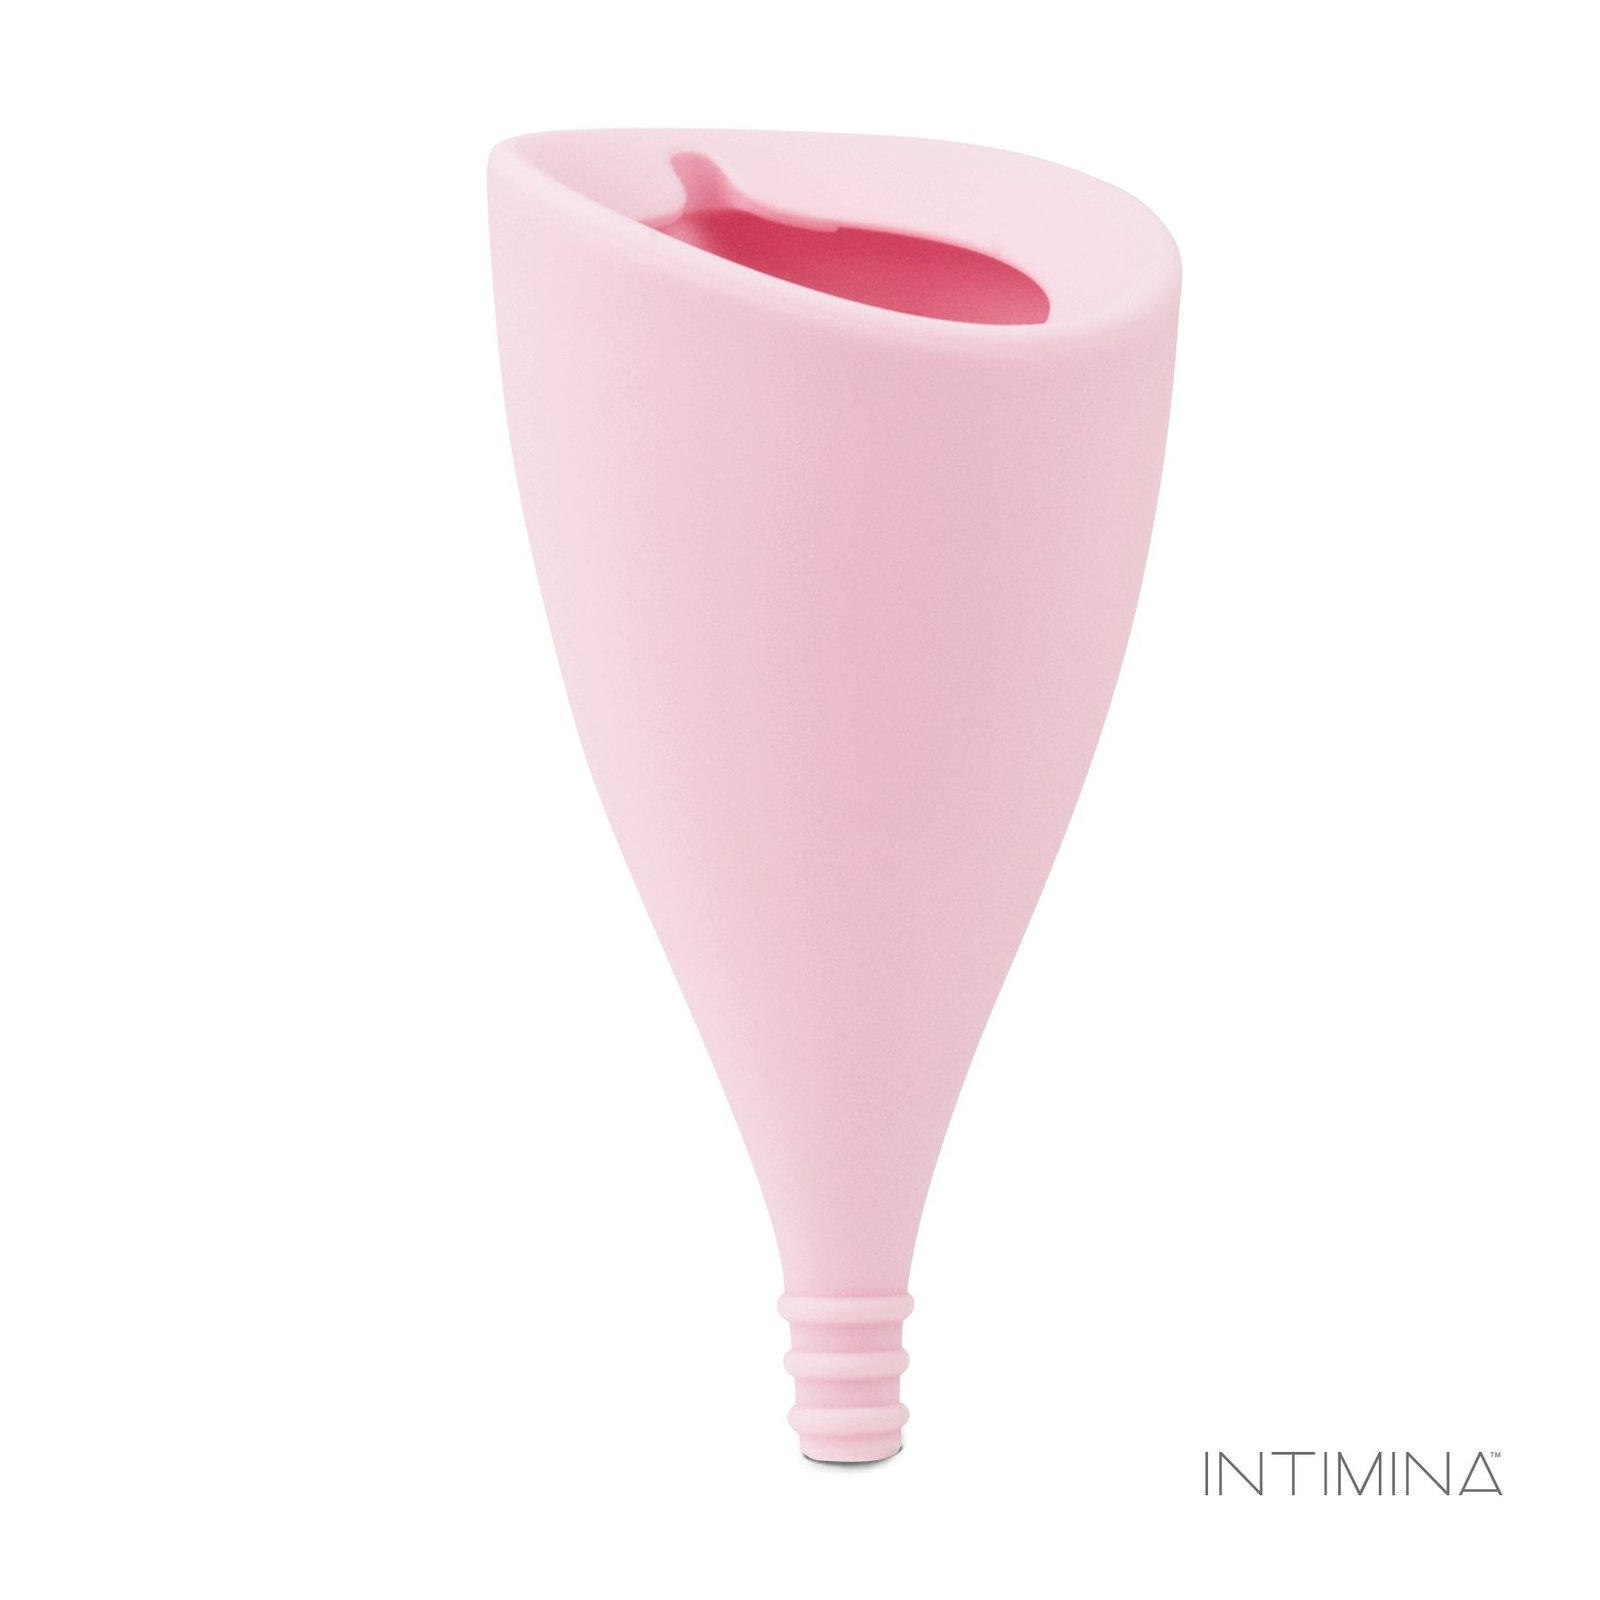 INTIMINA Lily Cup A 1 st